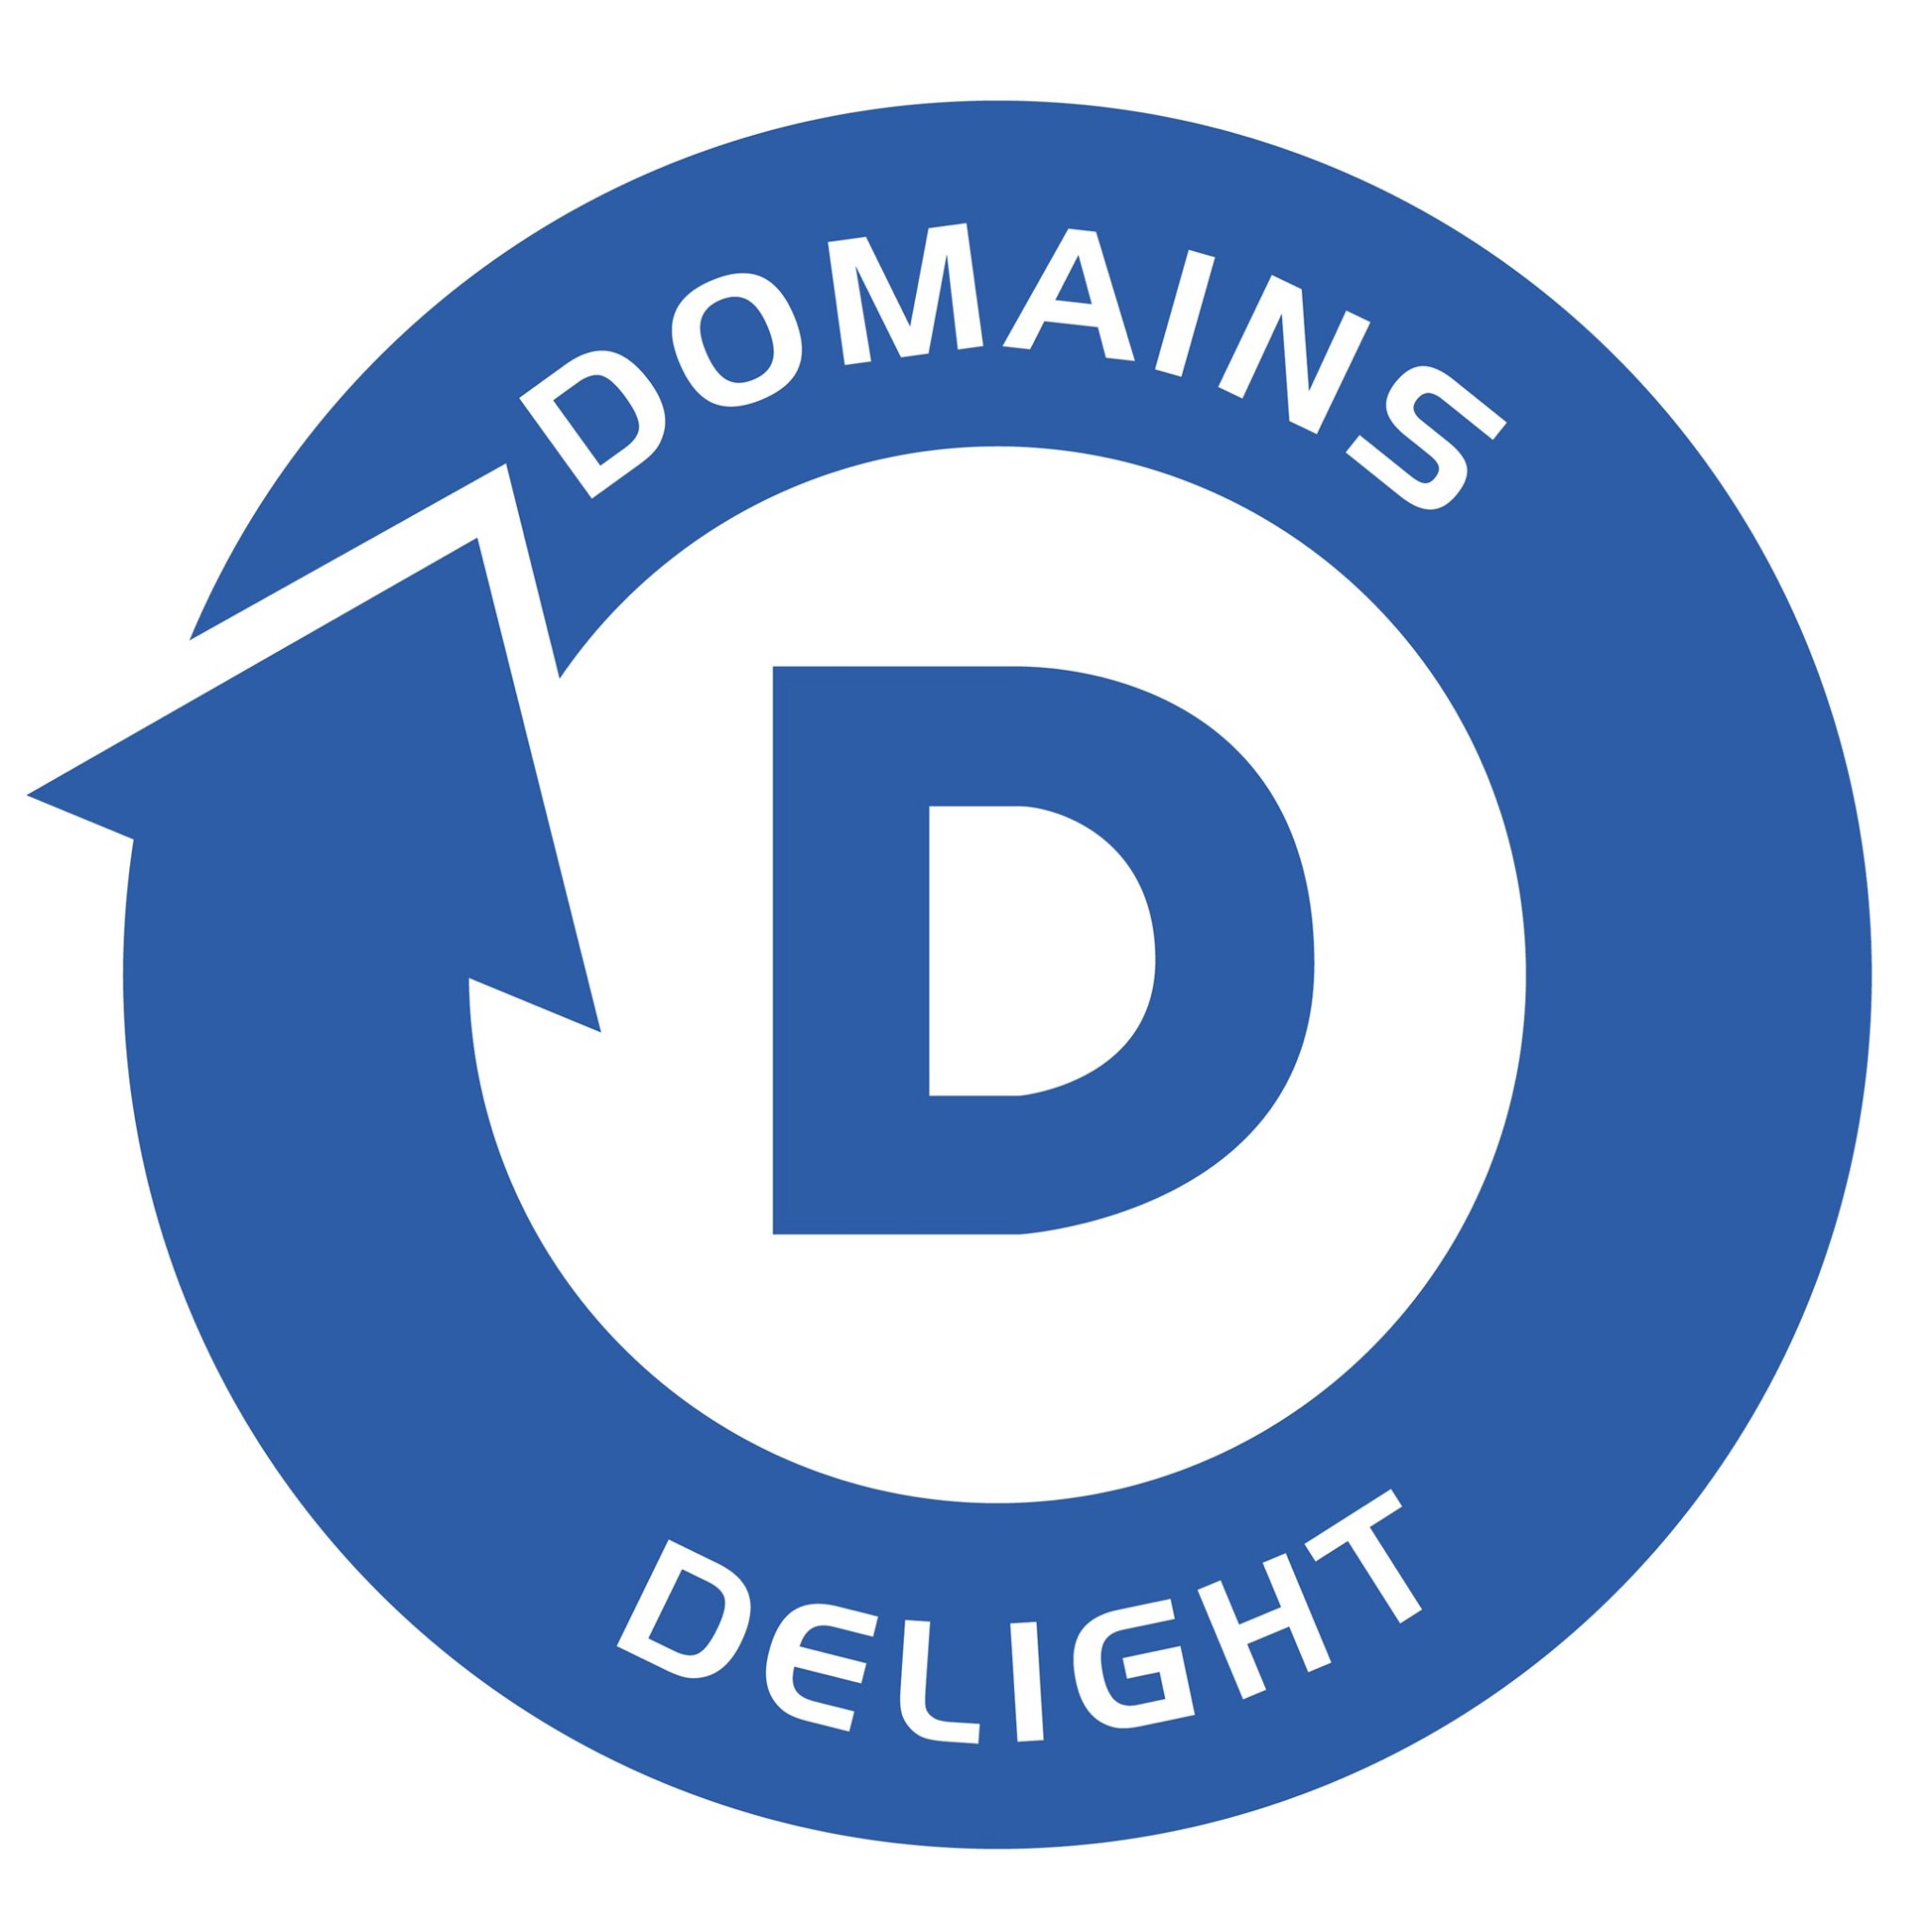 Get started with a great domain name for your business here.
Choosing the right domain name for your business is an important first step in your online presence